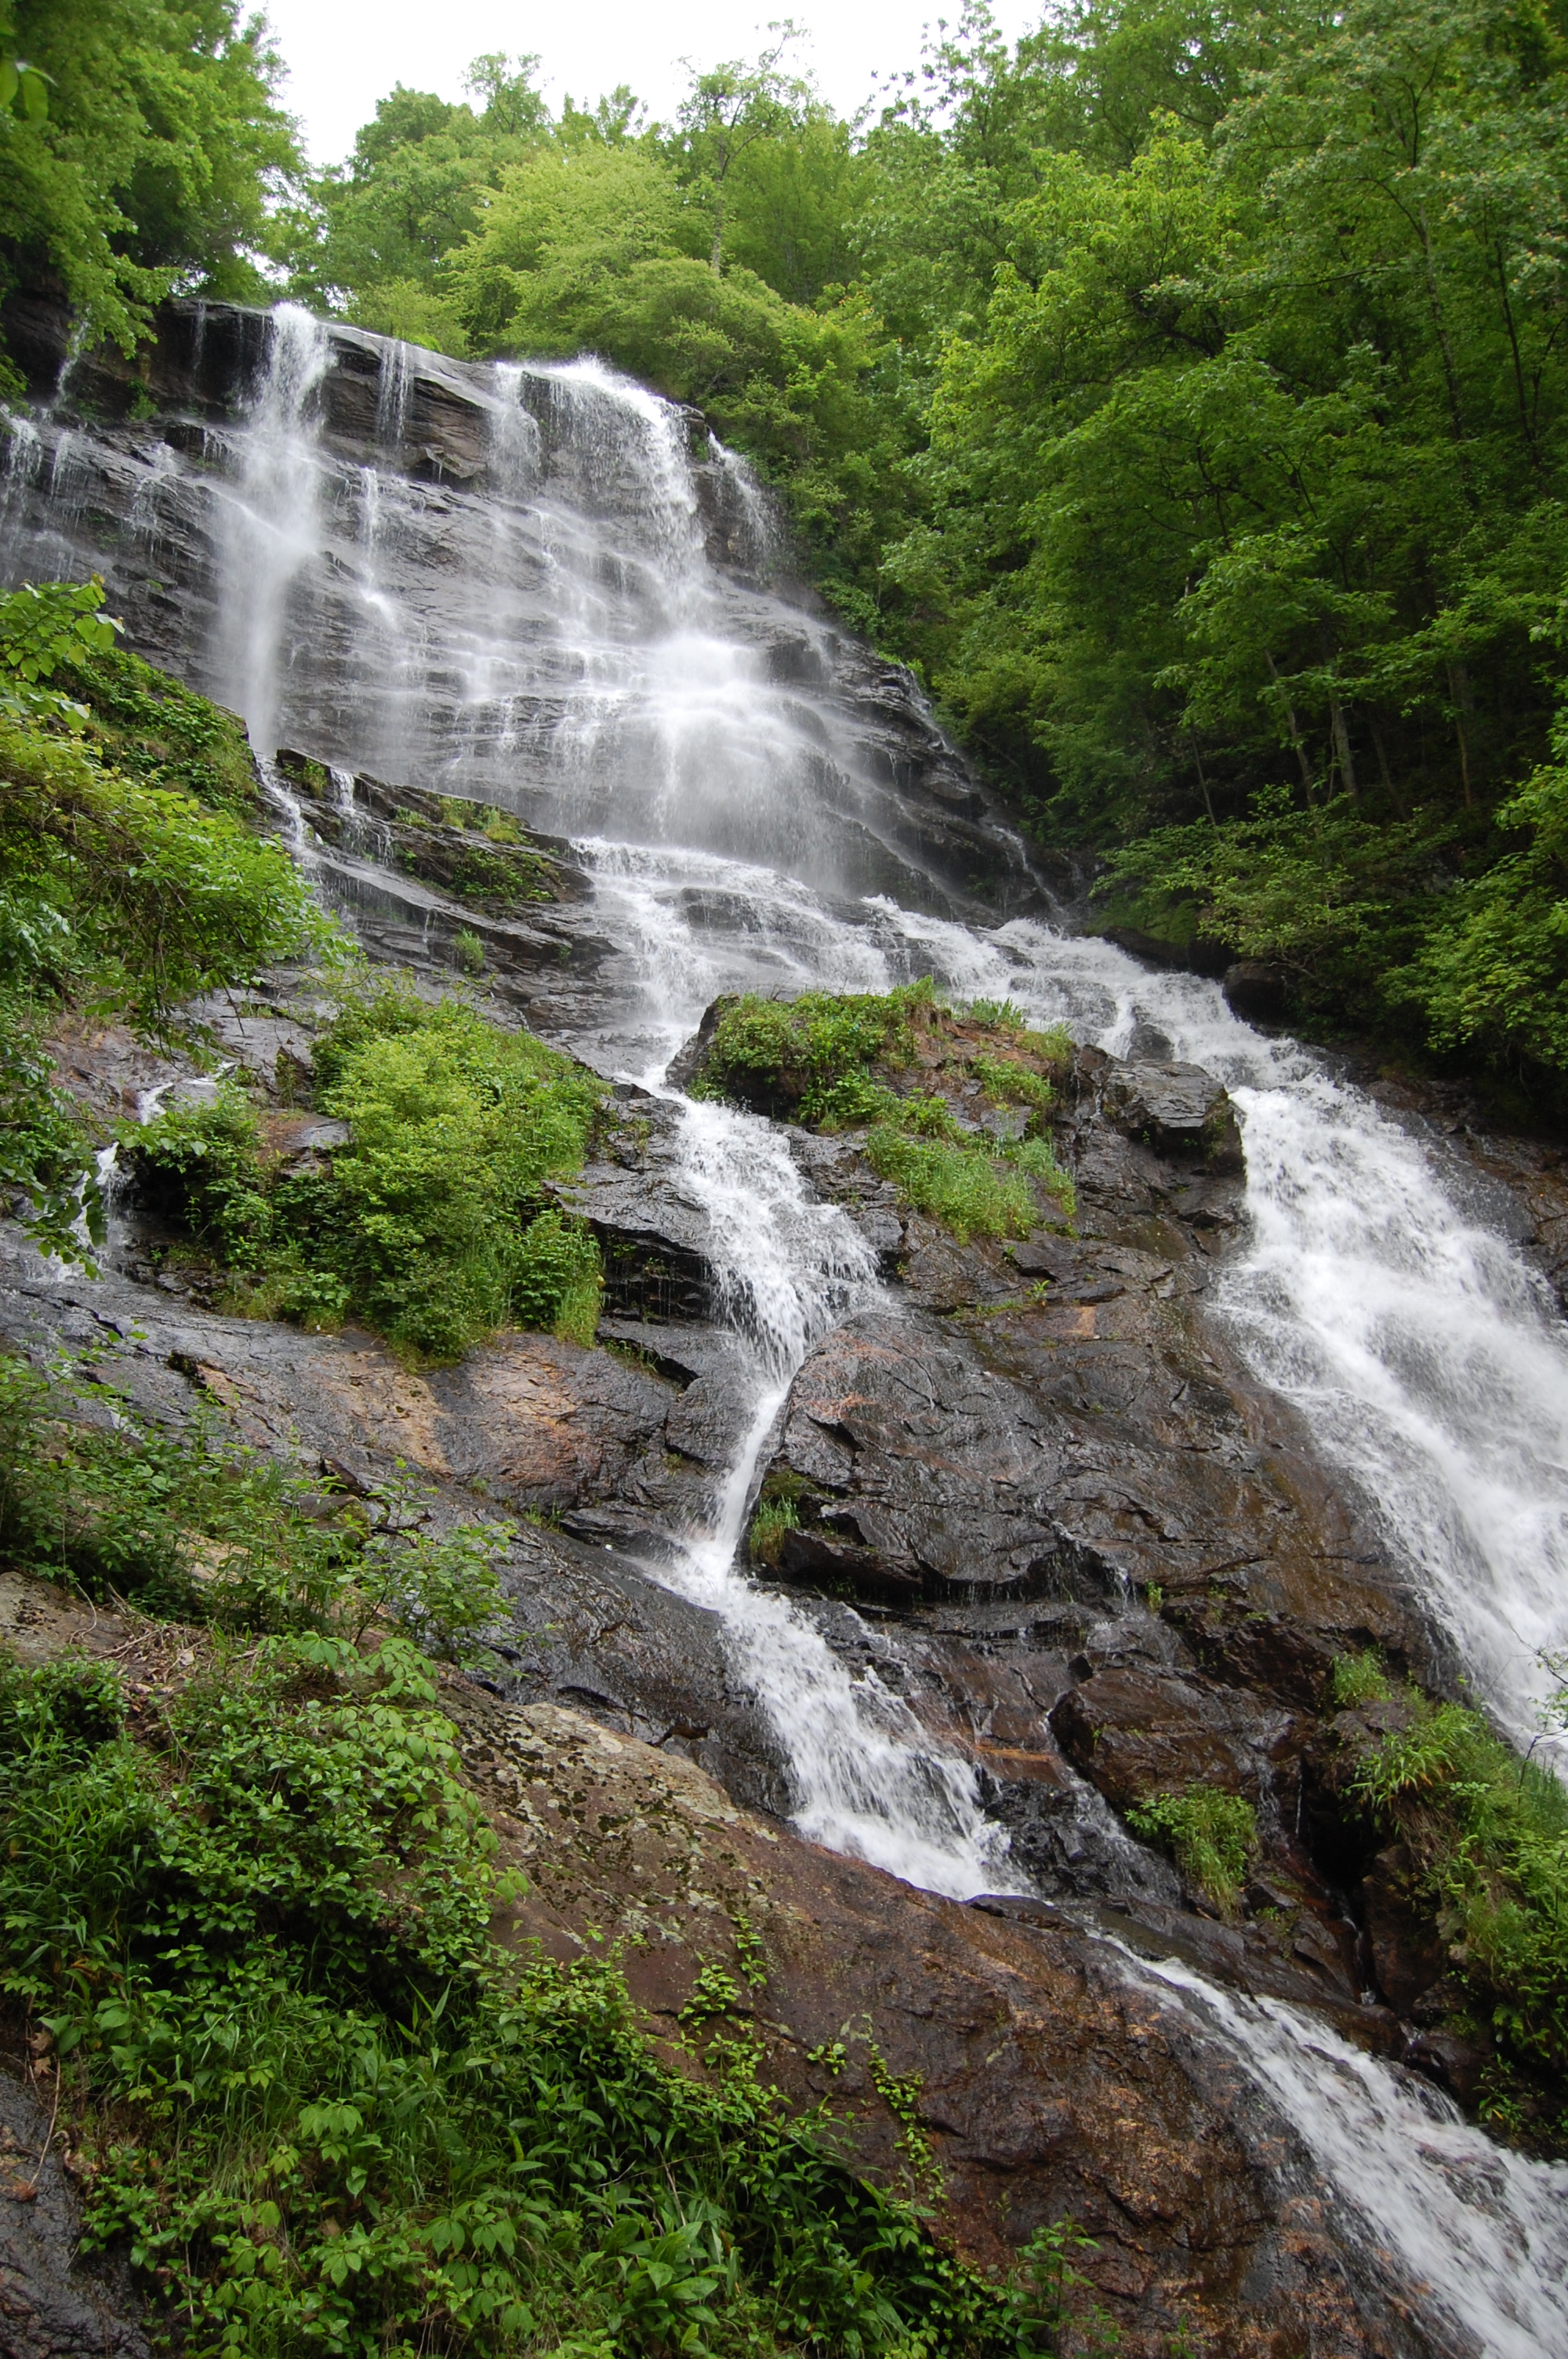 Visit the highest waterfall in Georgia at Amicaoloa State Park.